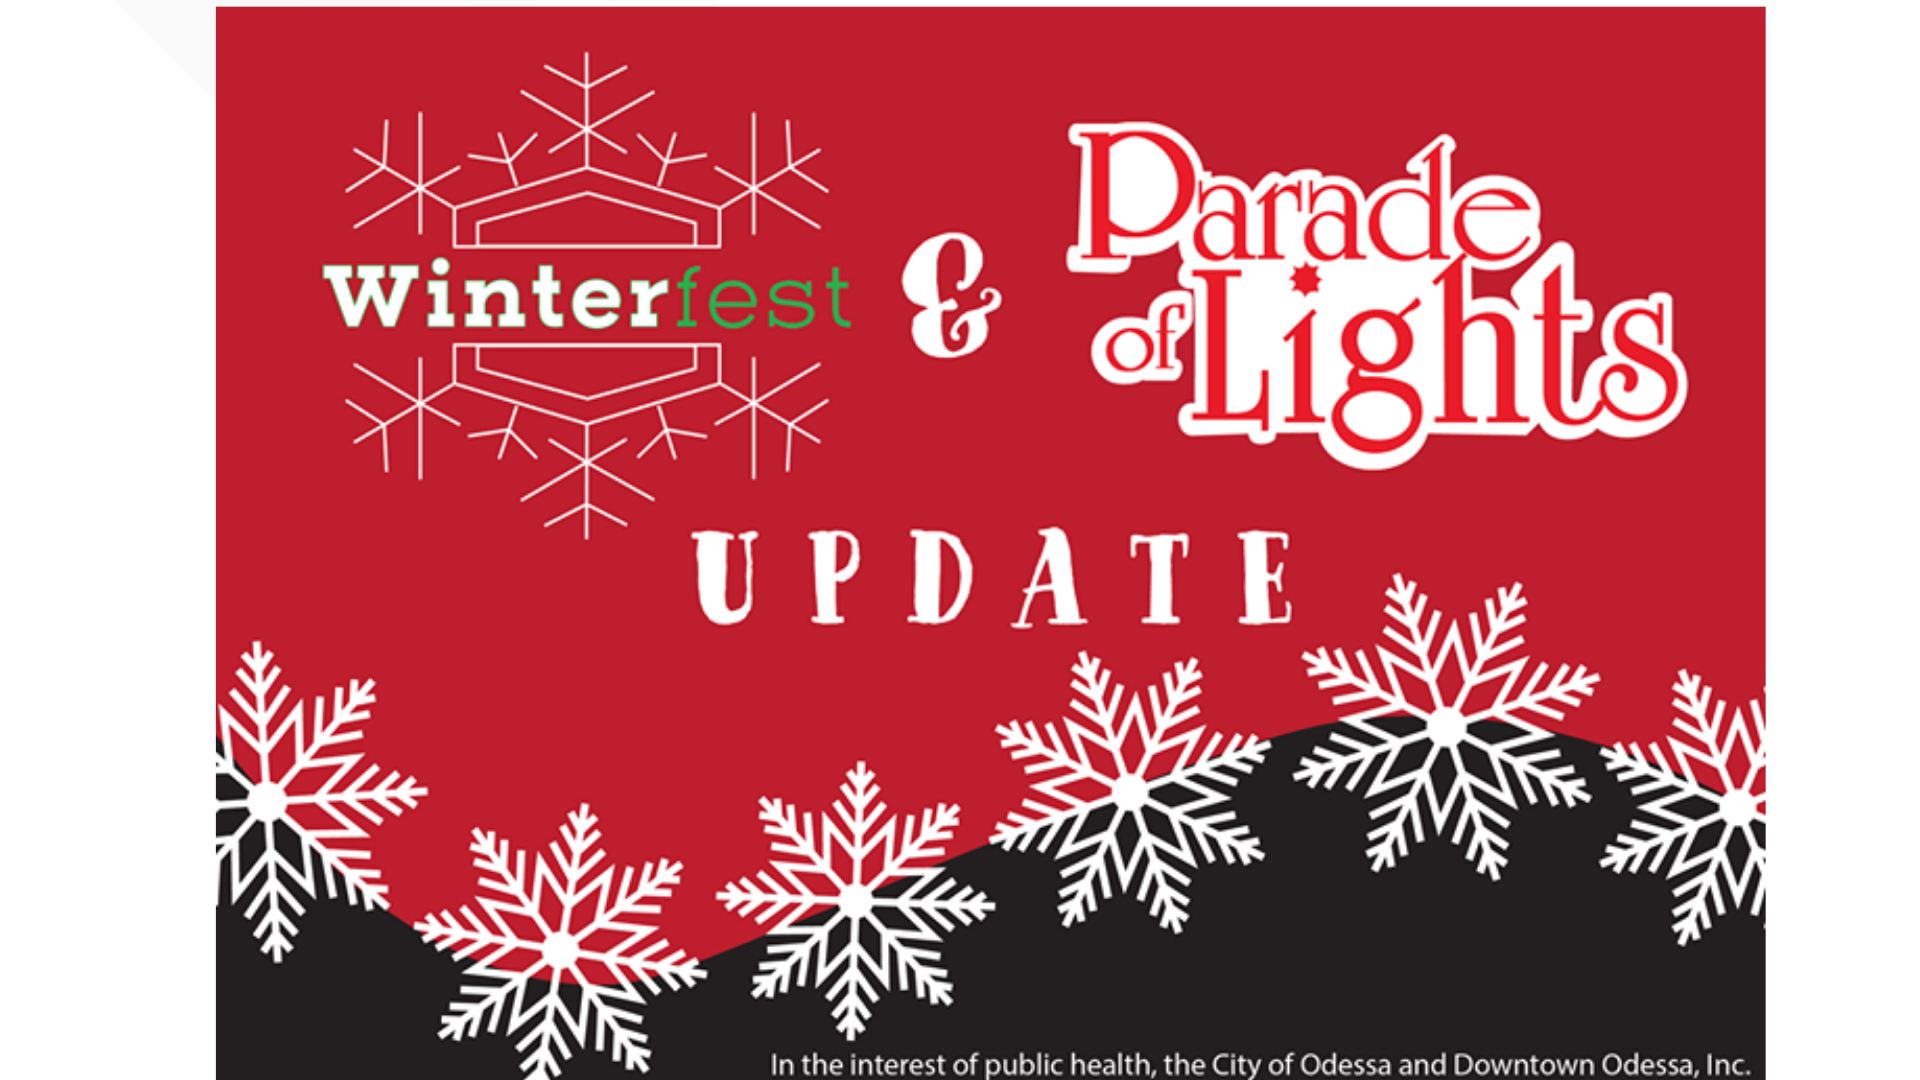 Odessa Parade of Lights, WinterFest being reconfigured for 2020